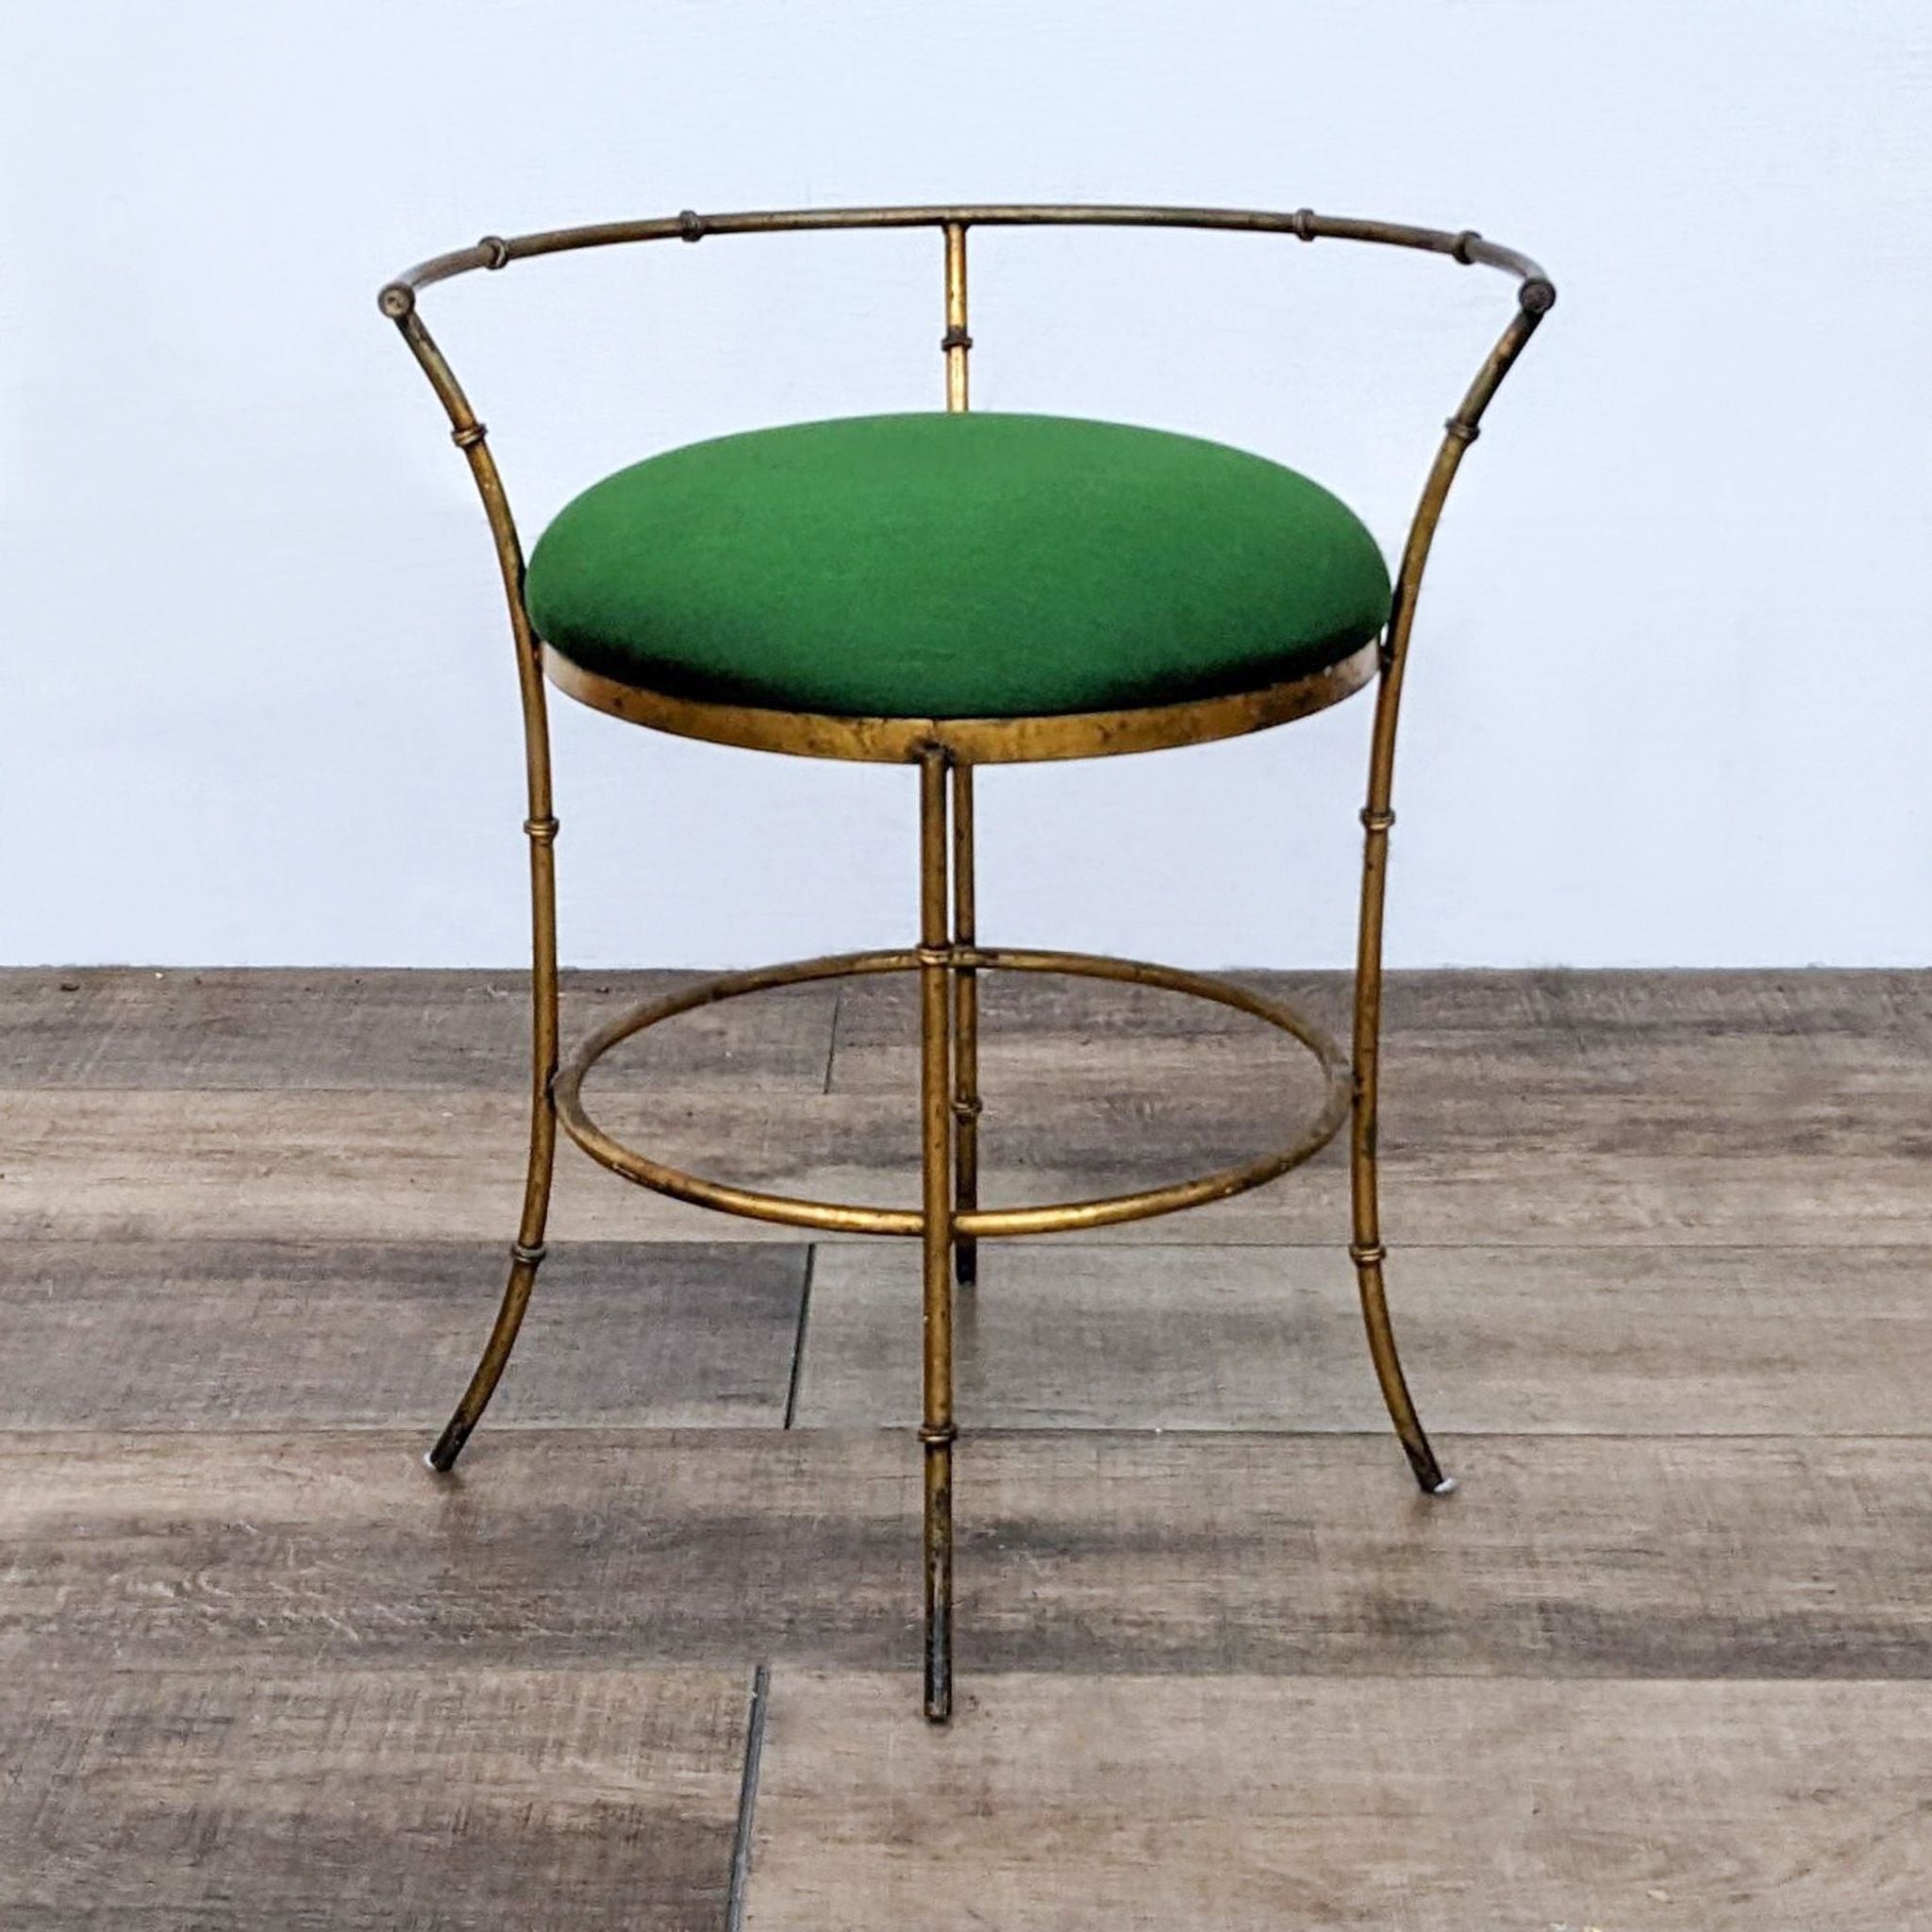 Vintage Gold Color Metal Frame Stool with a green cushioned seat, elegant design, on a wooden floor.